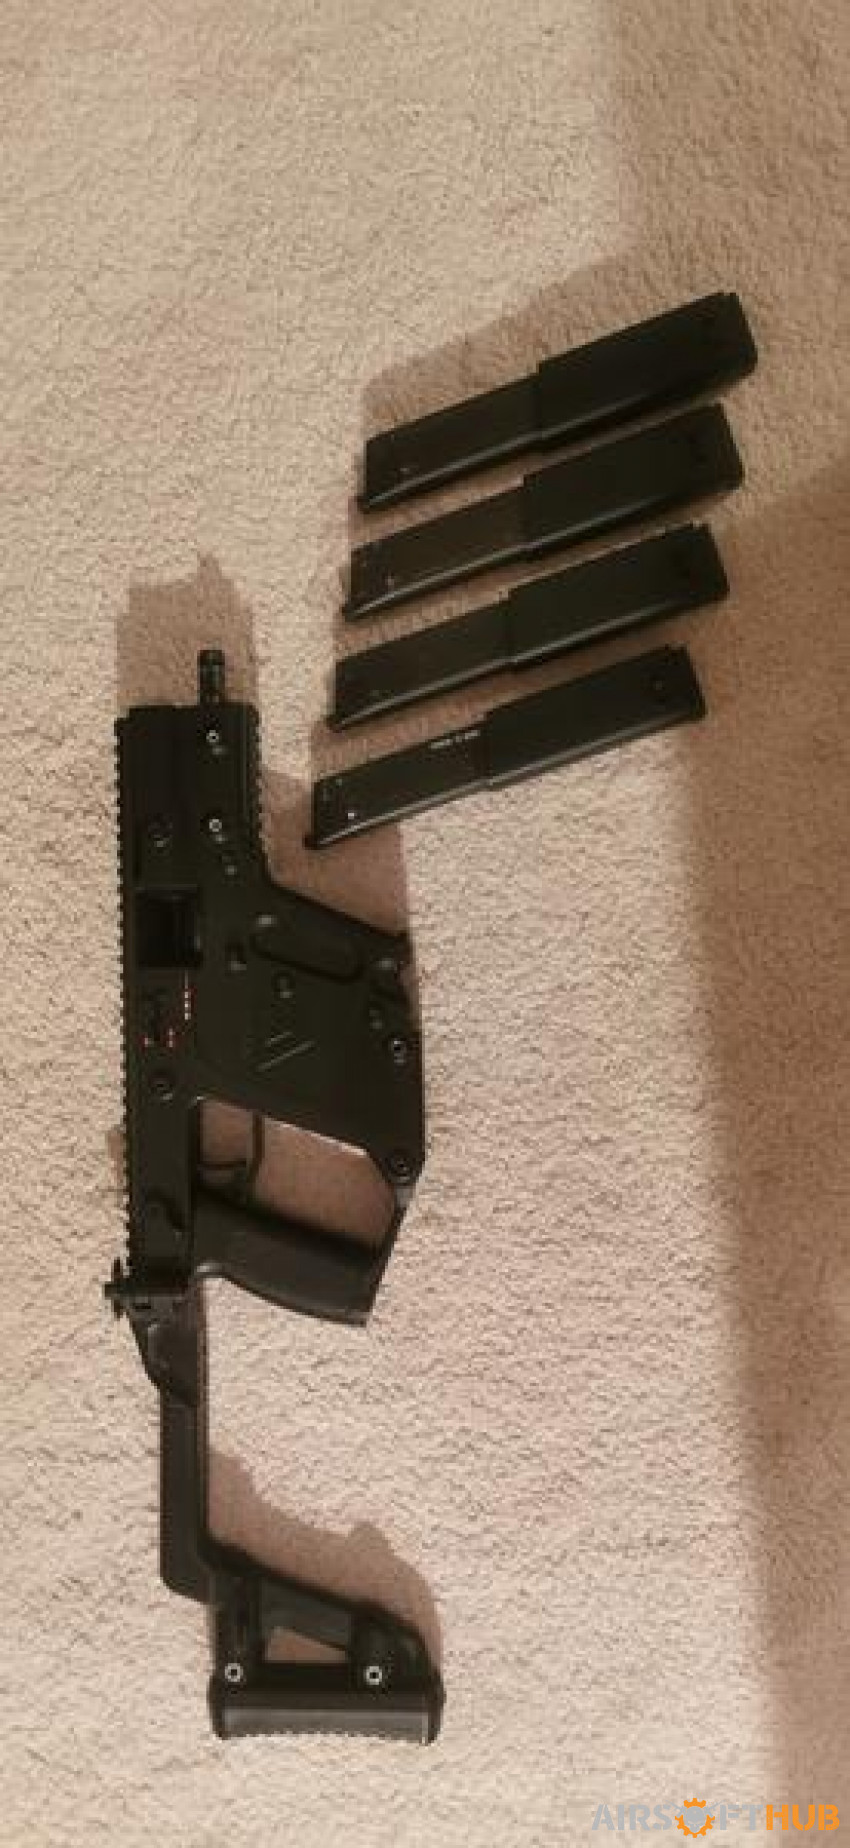 Kwa Gbb Vector with 4 mags - Used airsoft equipment